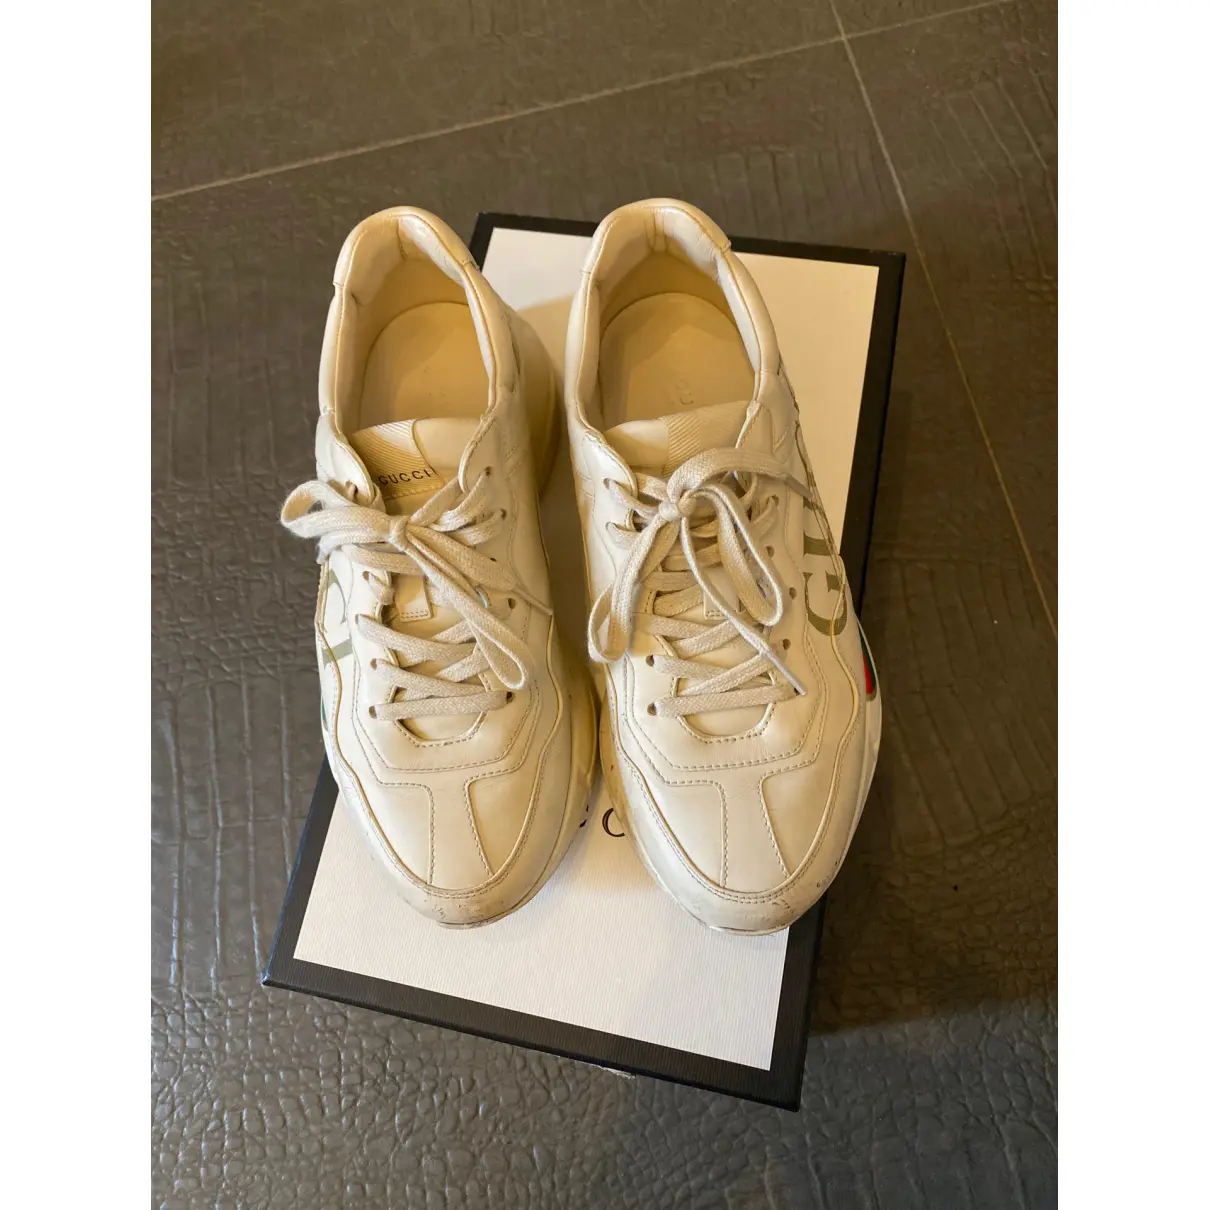 Buy Gucci Rhyton leather trainers online